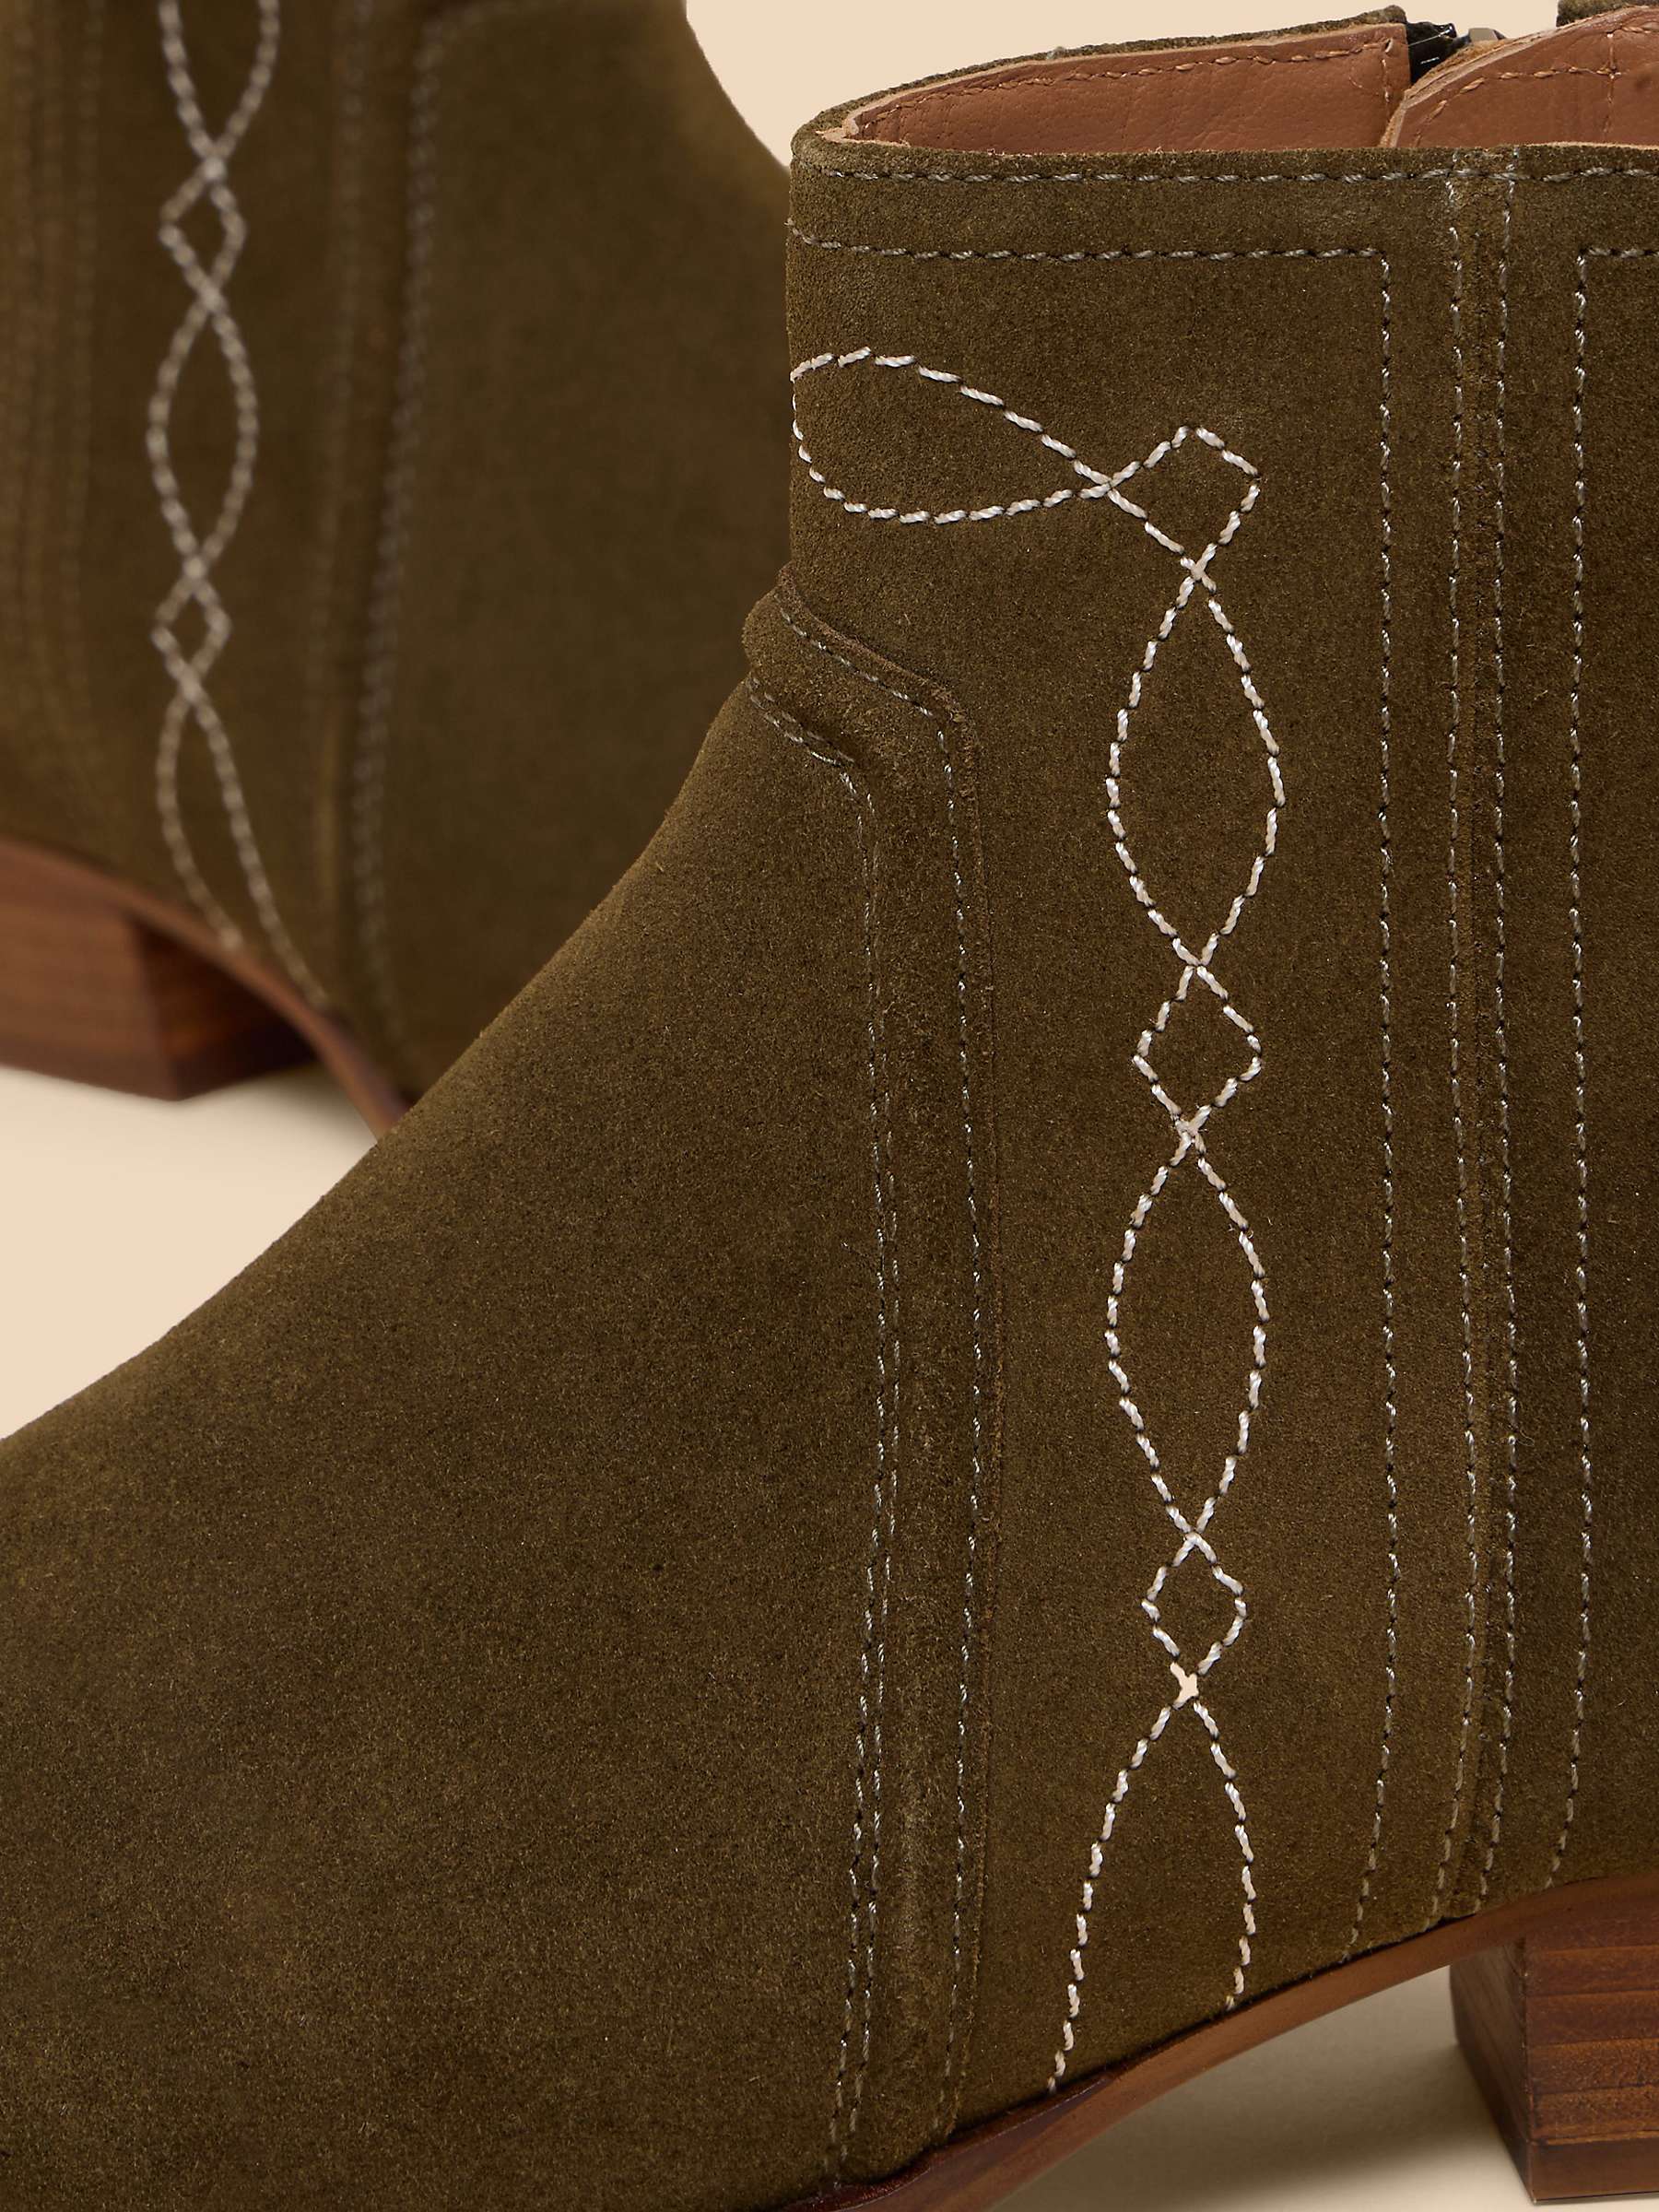 Buy White Stuff Cedar Suede Embroidered Boot, Khaki Online at johnlewis.com